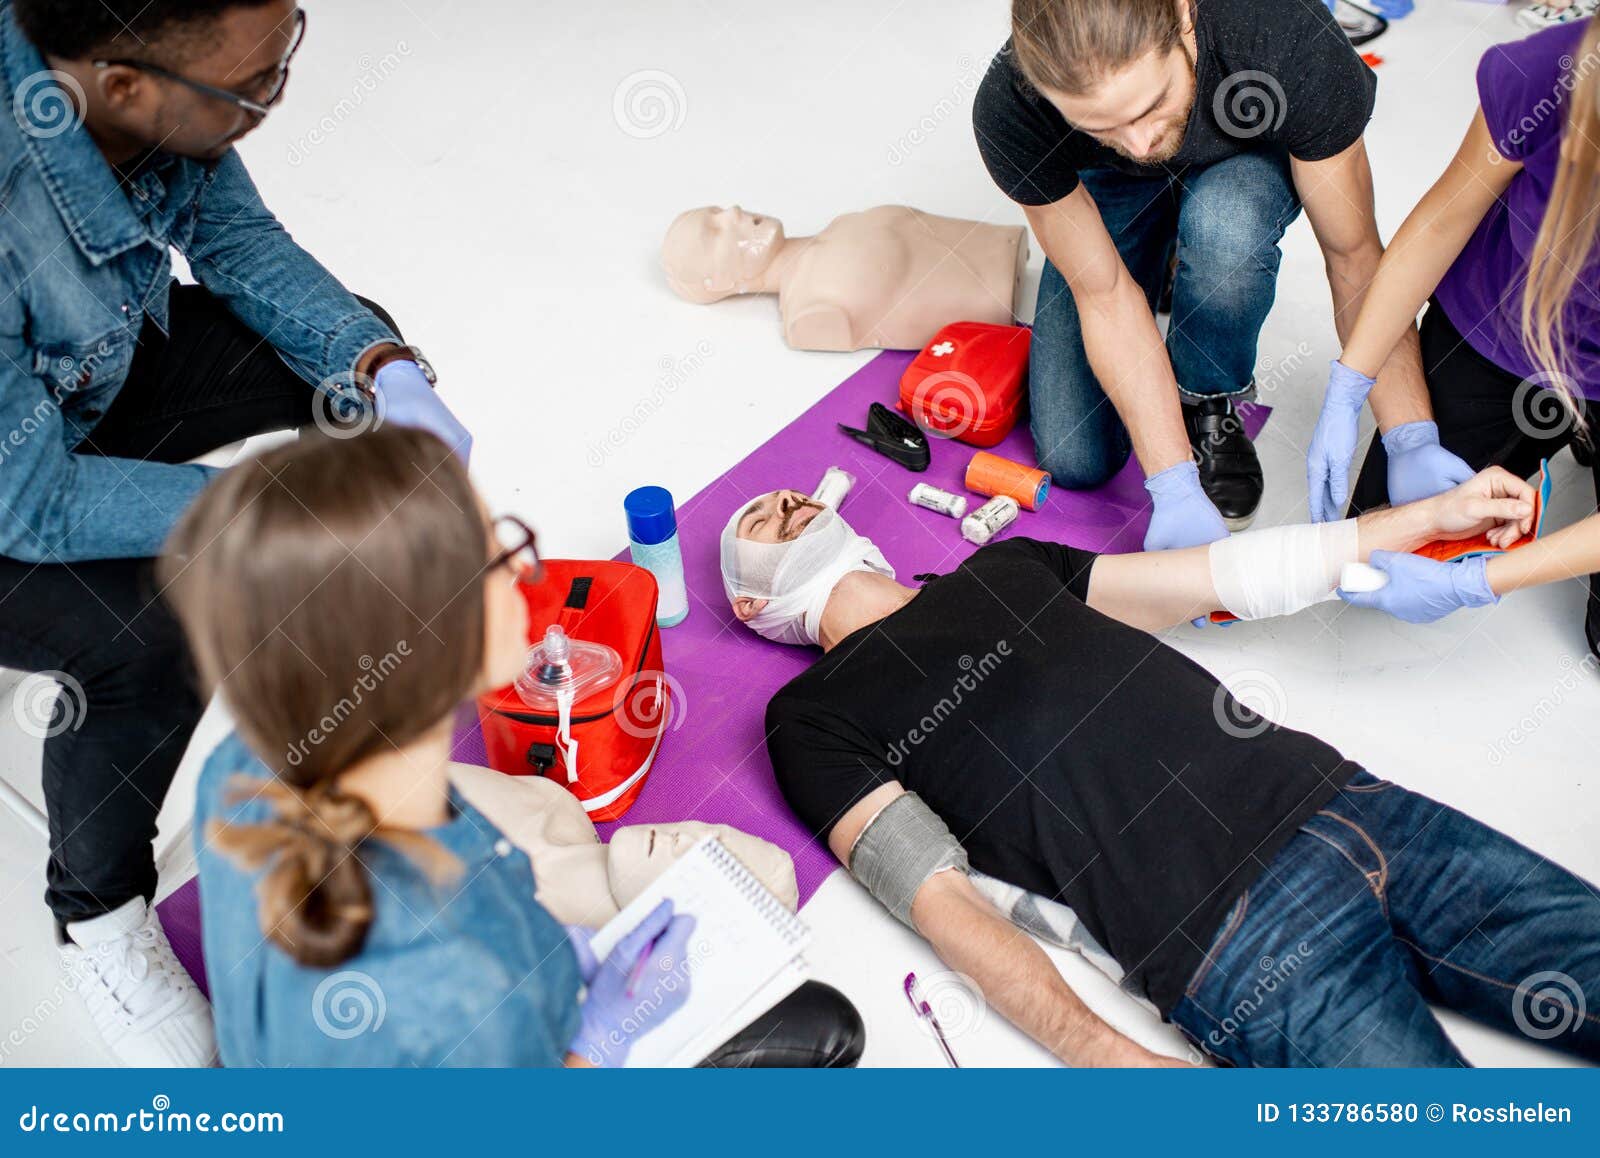 People during the First Aid Training Stock Photo - Image of medical